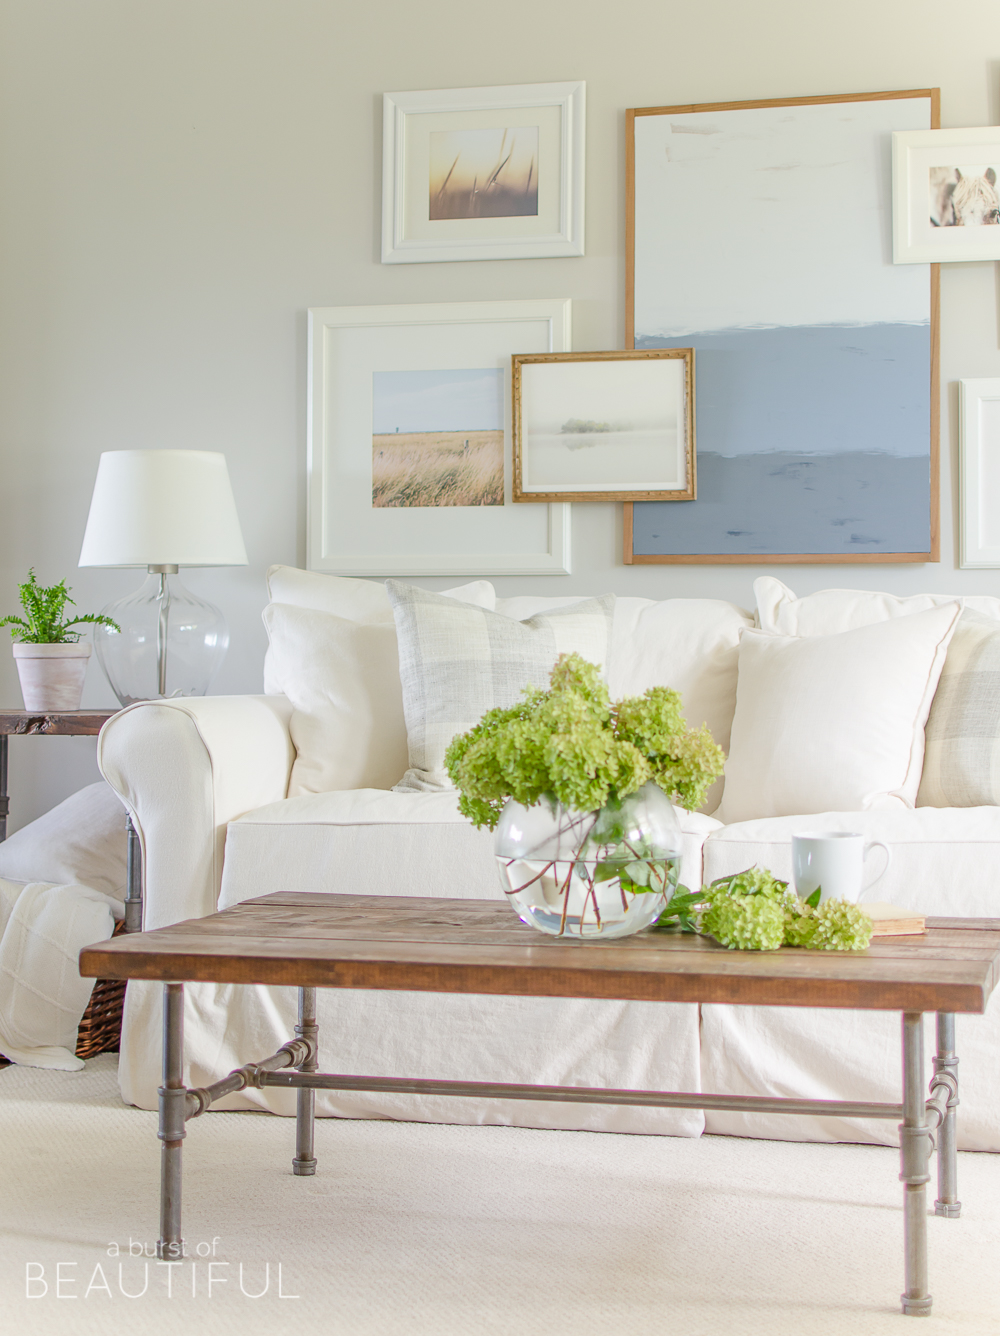 A white slipcovered sofa creates a casual and relaxed feel in this modern farmhouse